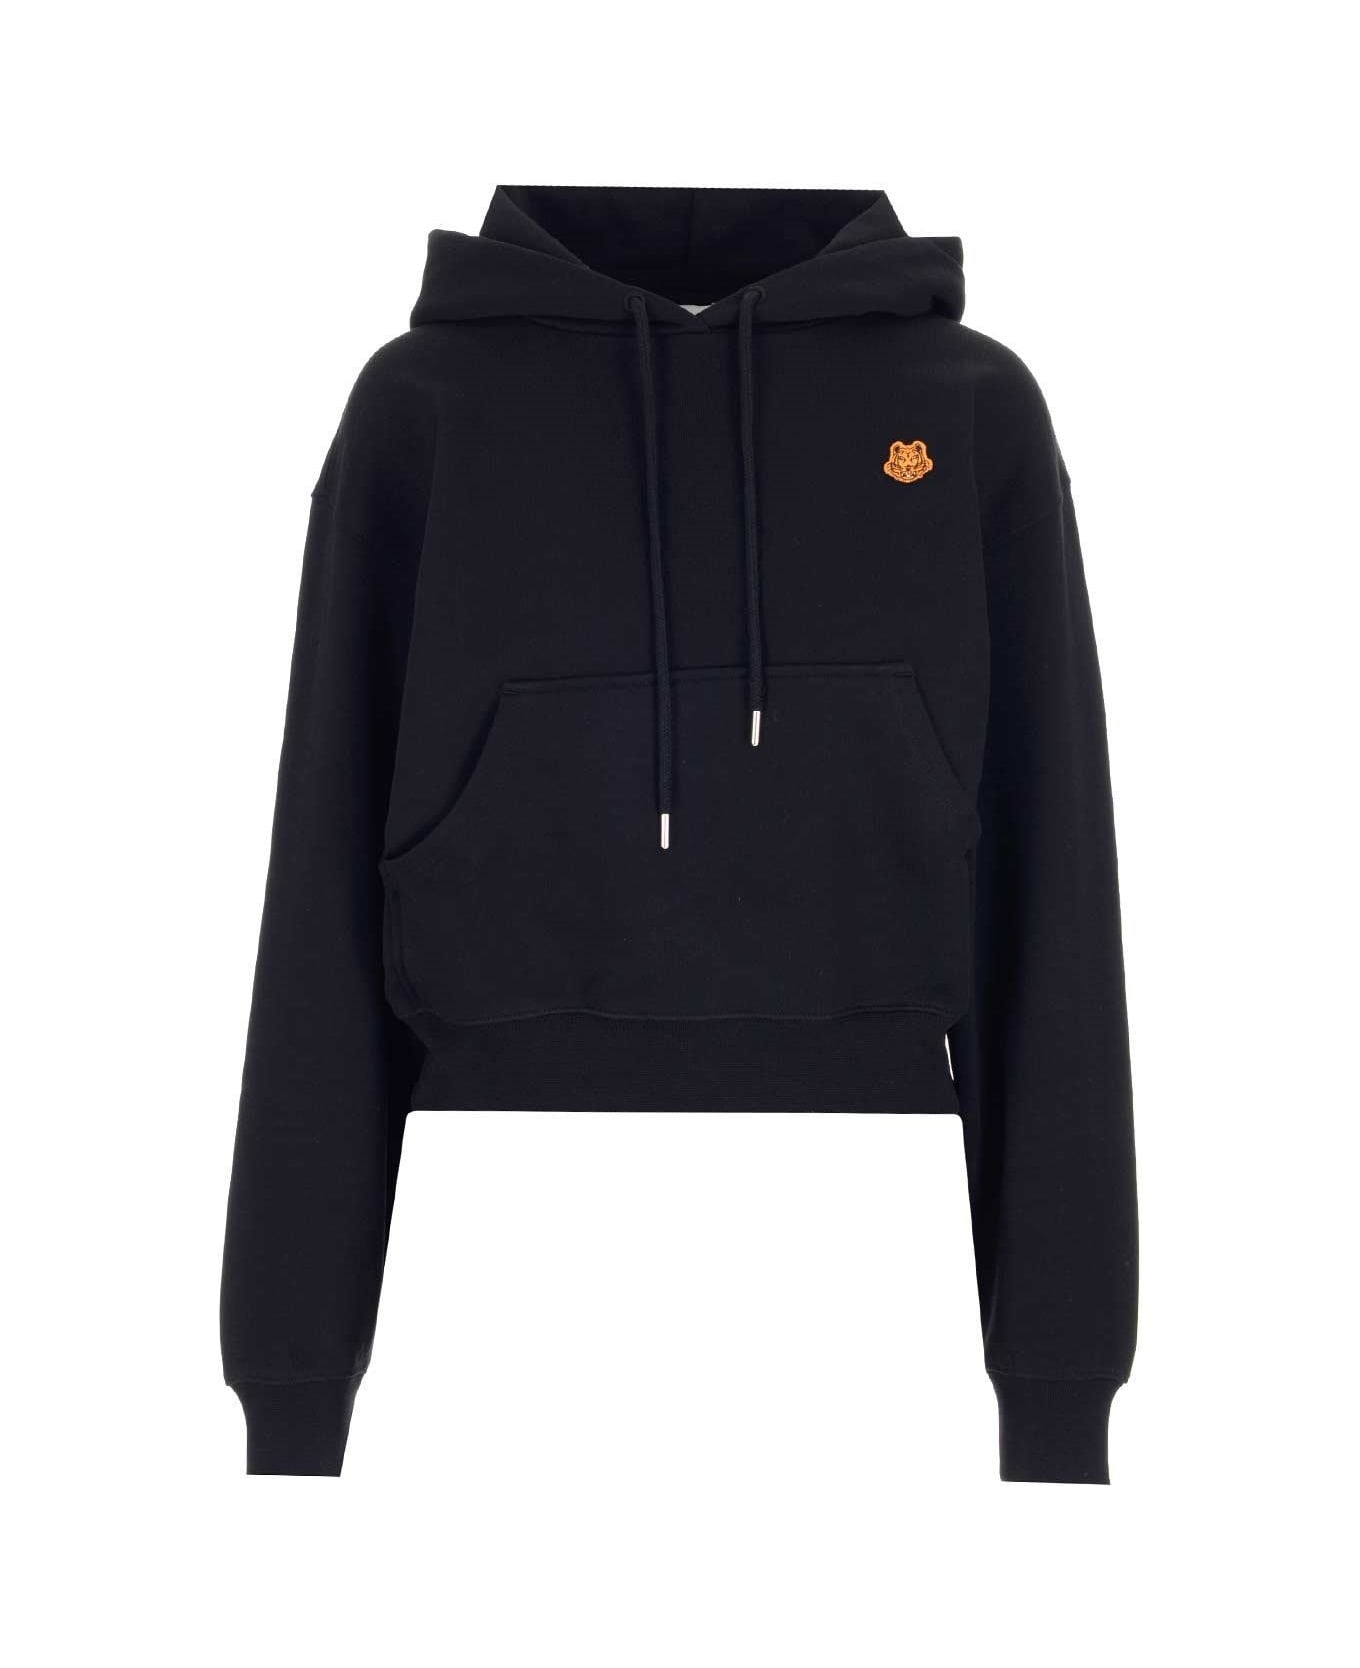 Tiger Crest Embroidered Drawstring Hoodie - 1